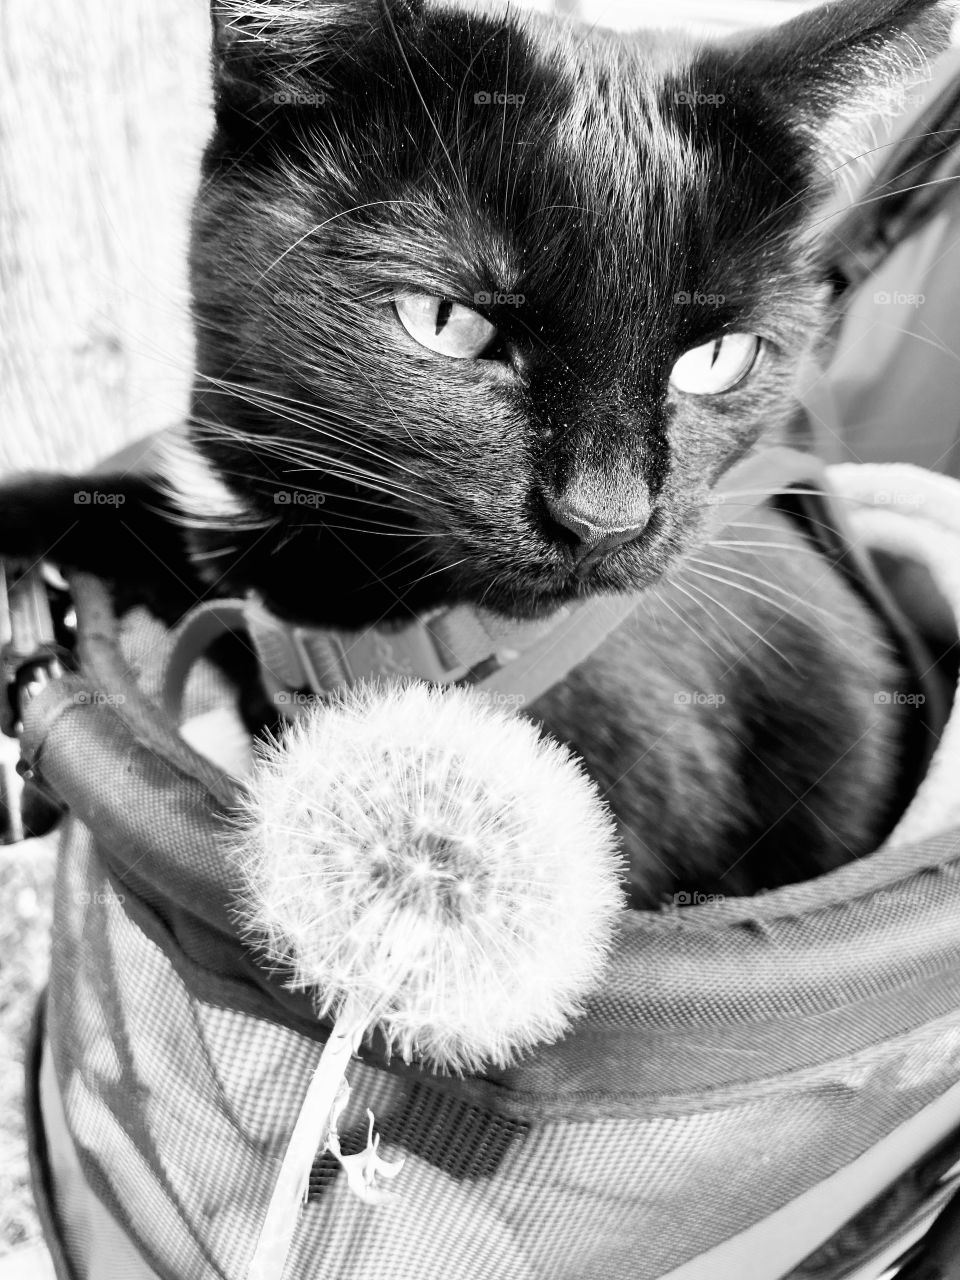 Darling black and white photo of black kitty cat looking at white dandelion! 